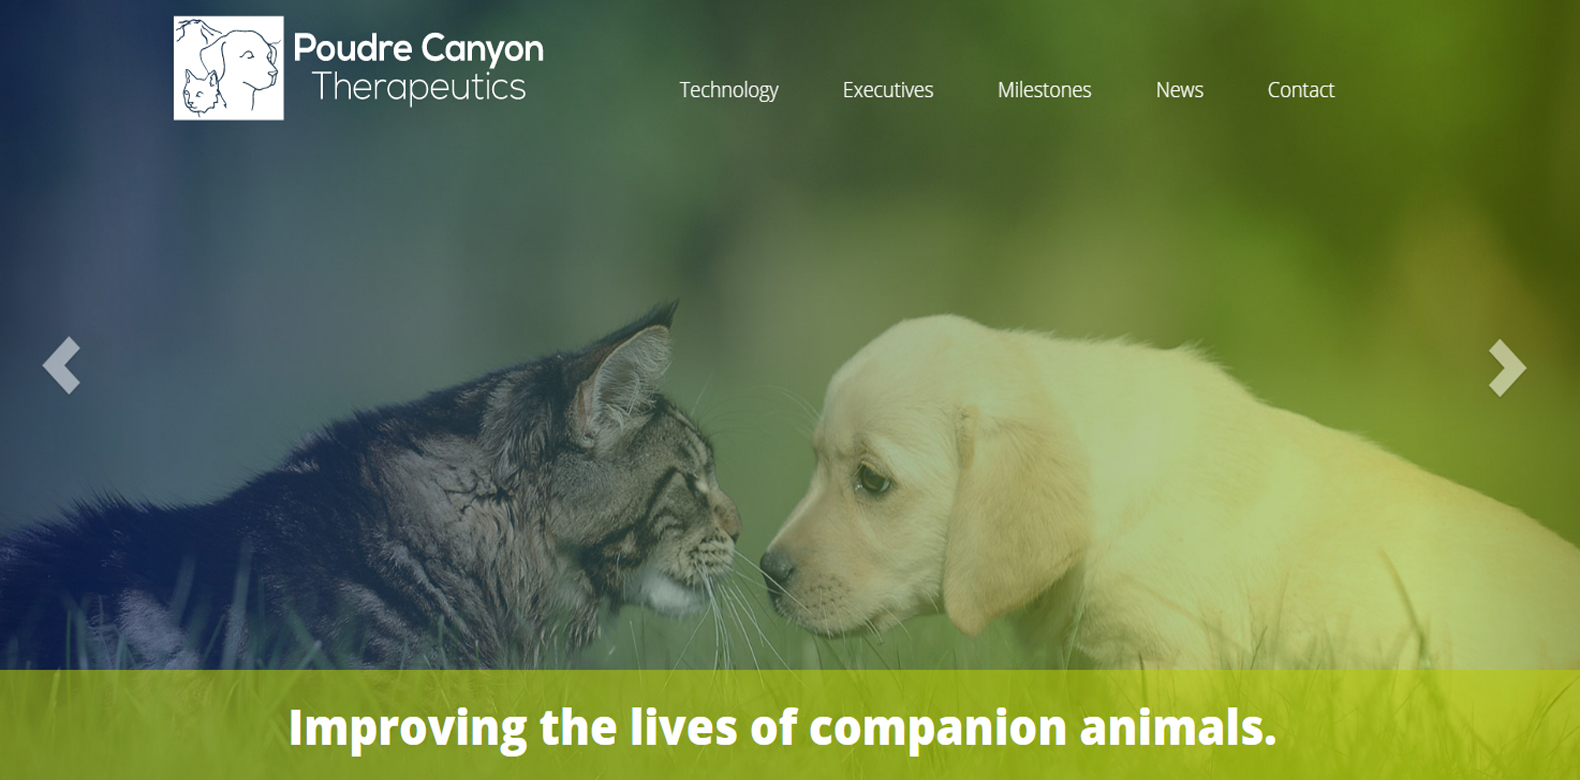 
New Website Launched: Poudre Canyon Therapeutics